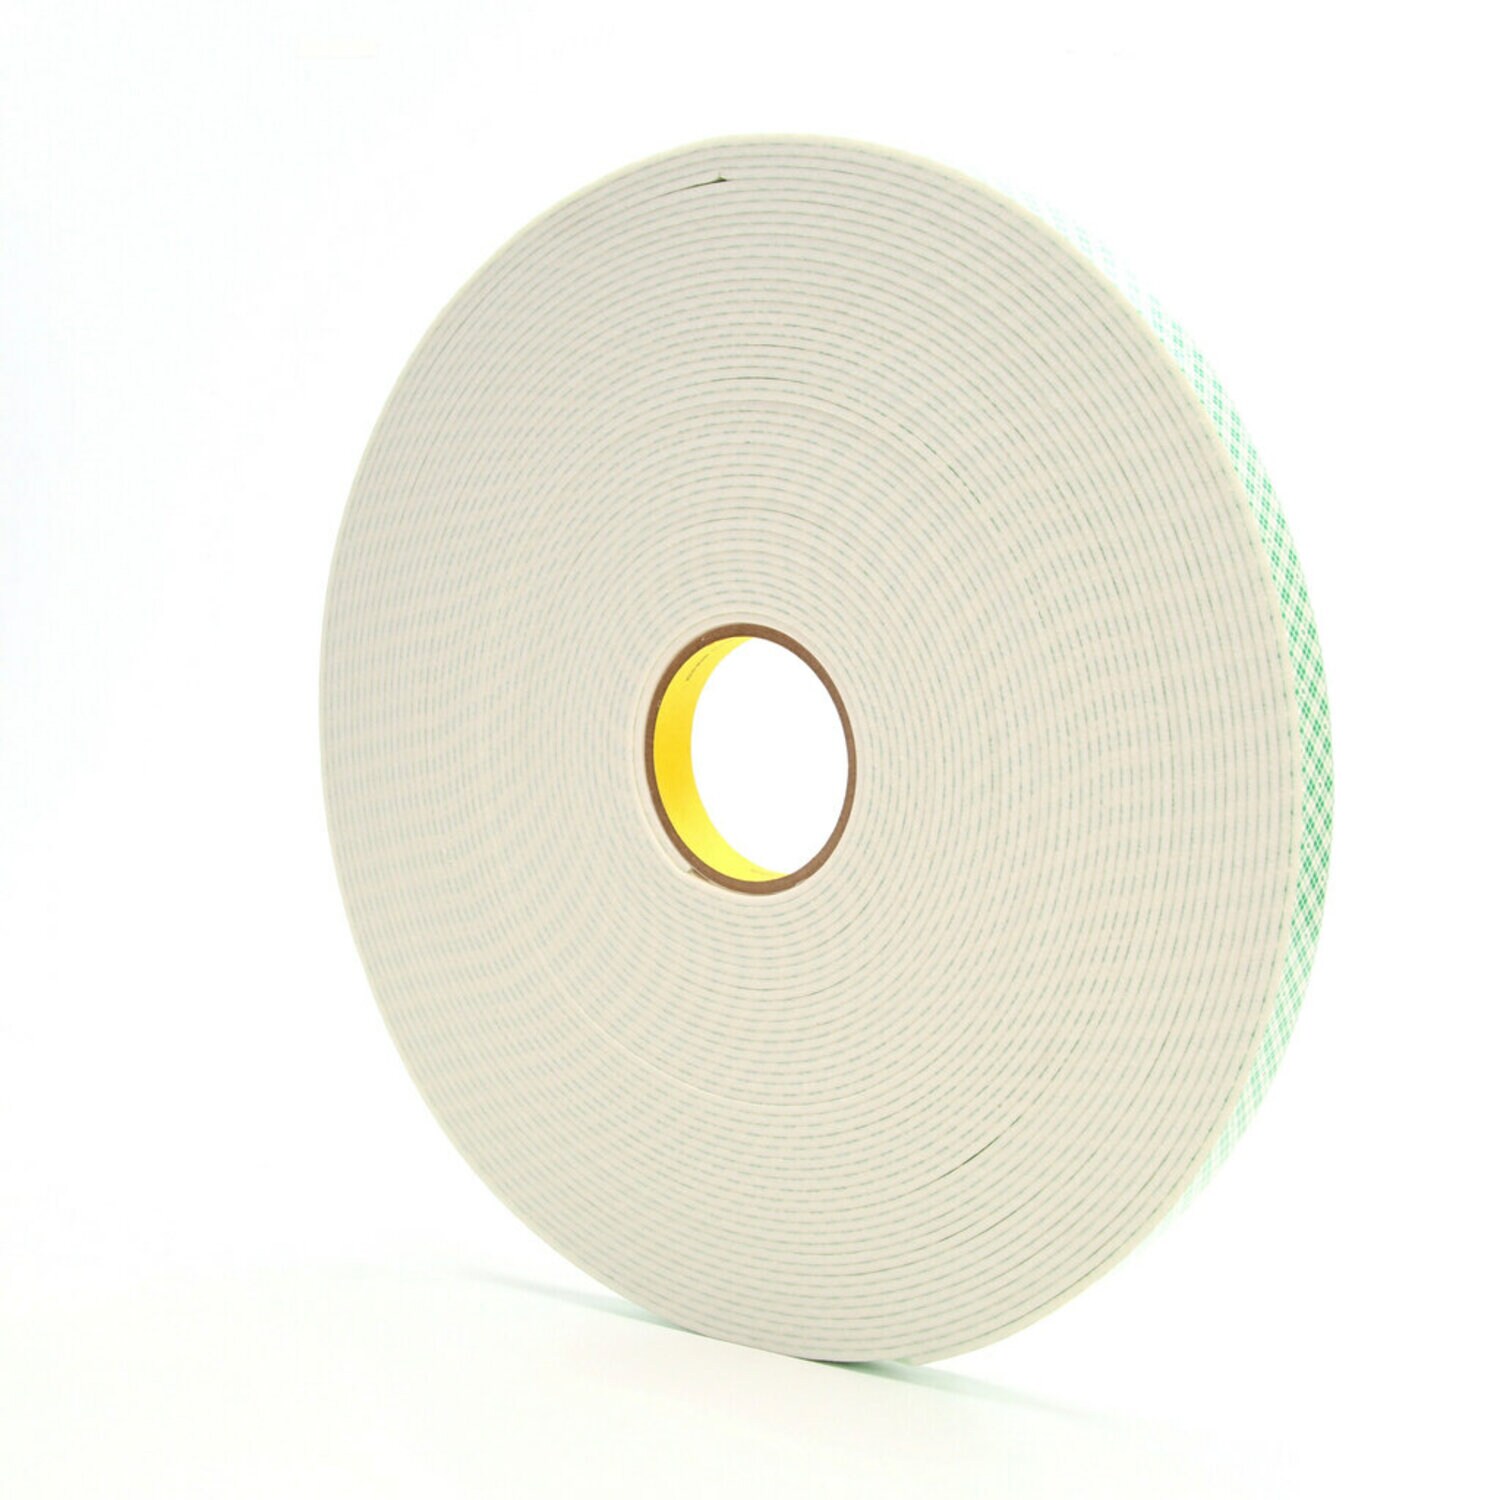 7100000151 - 3M Urethane Foam Tape 4116, Natural, 62 mil, Roll, Config